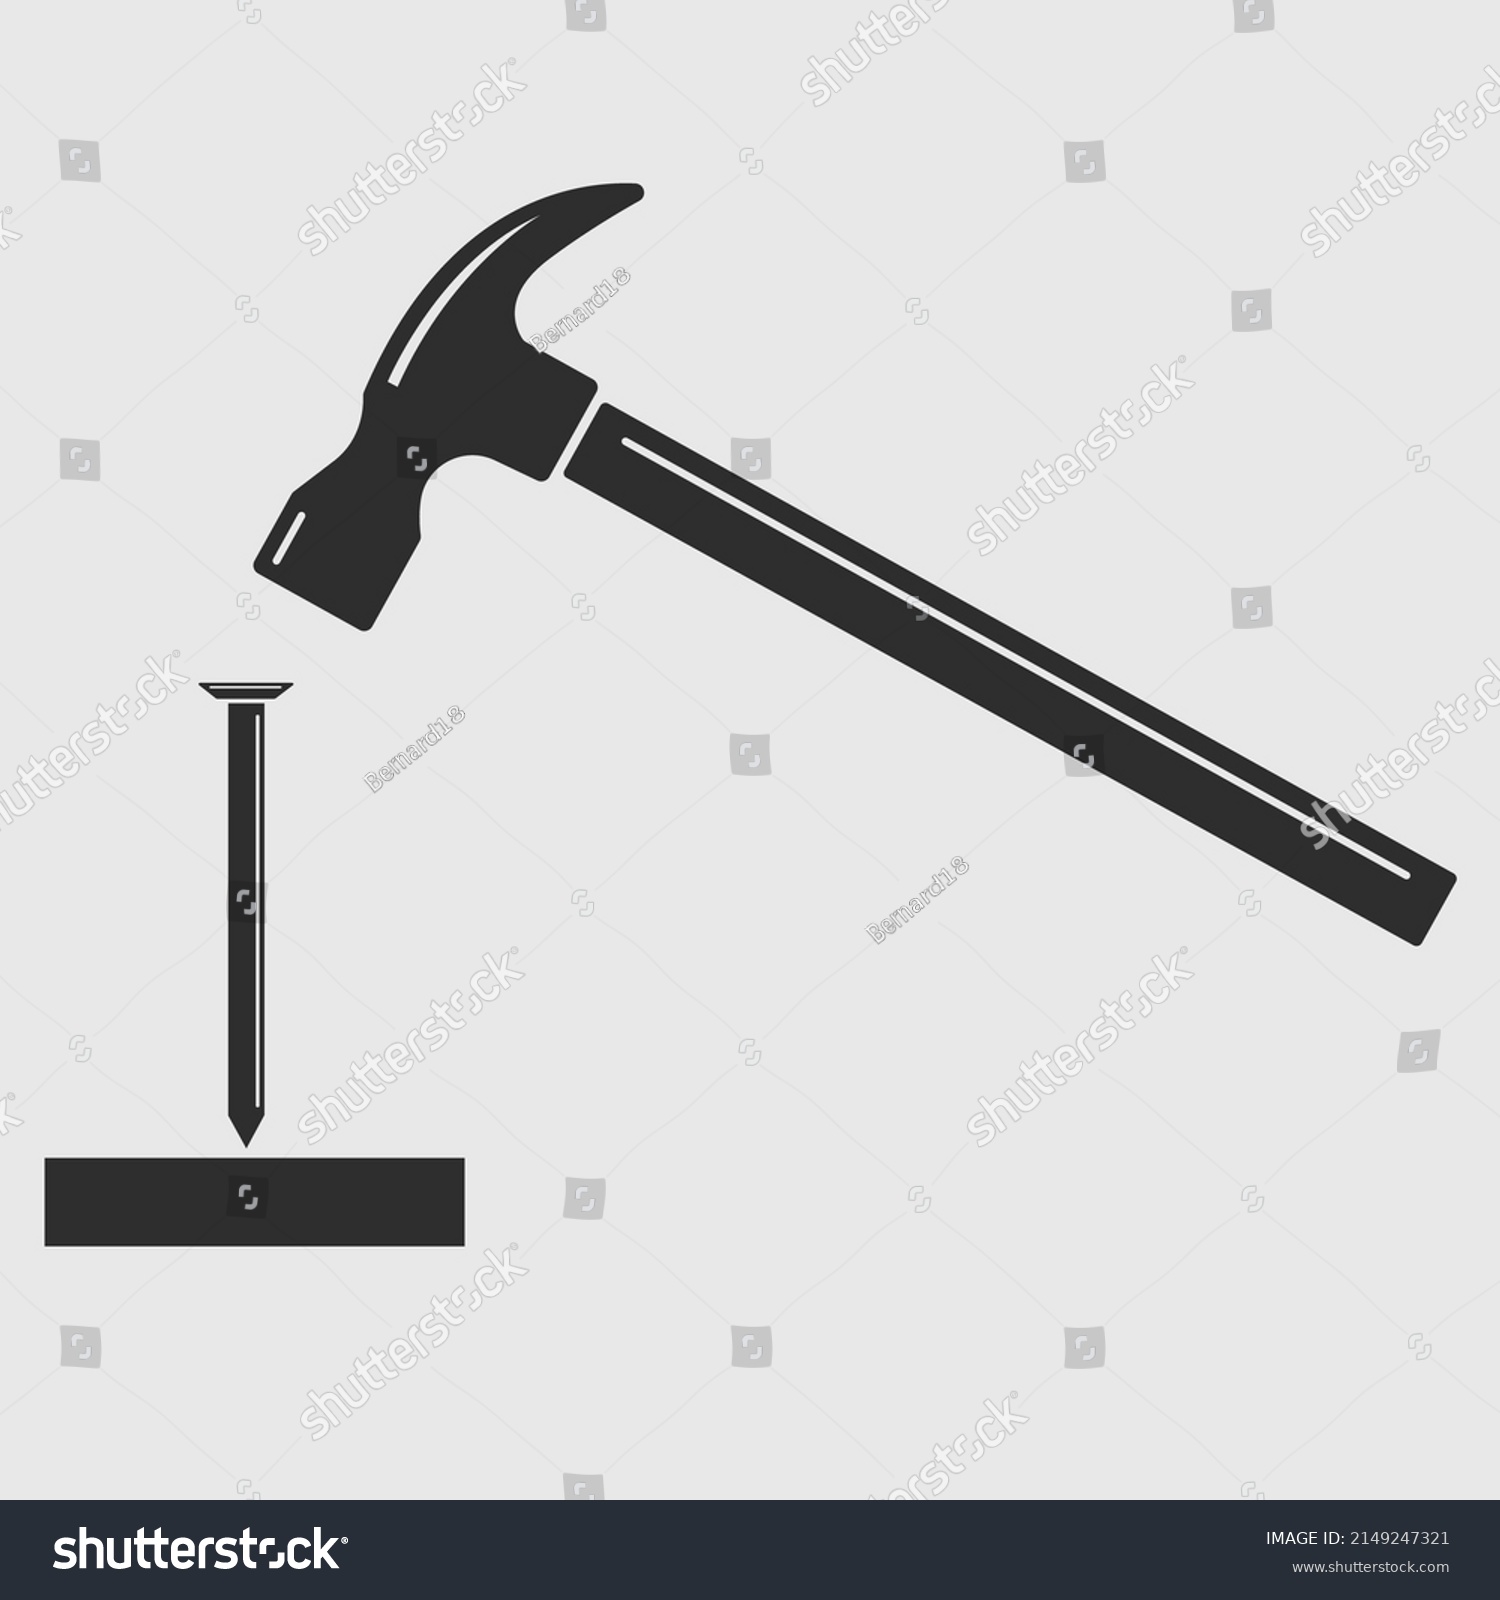 SVG of A hammer and nail for an icon, sign or logo svg